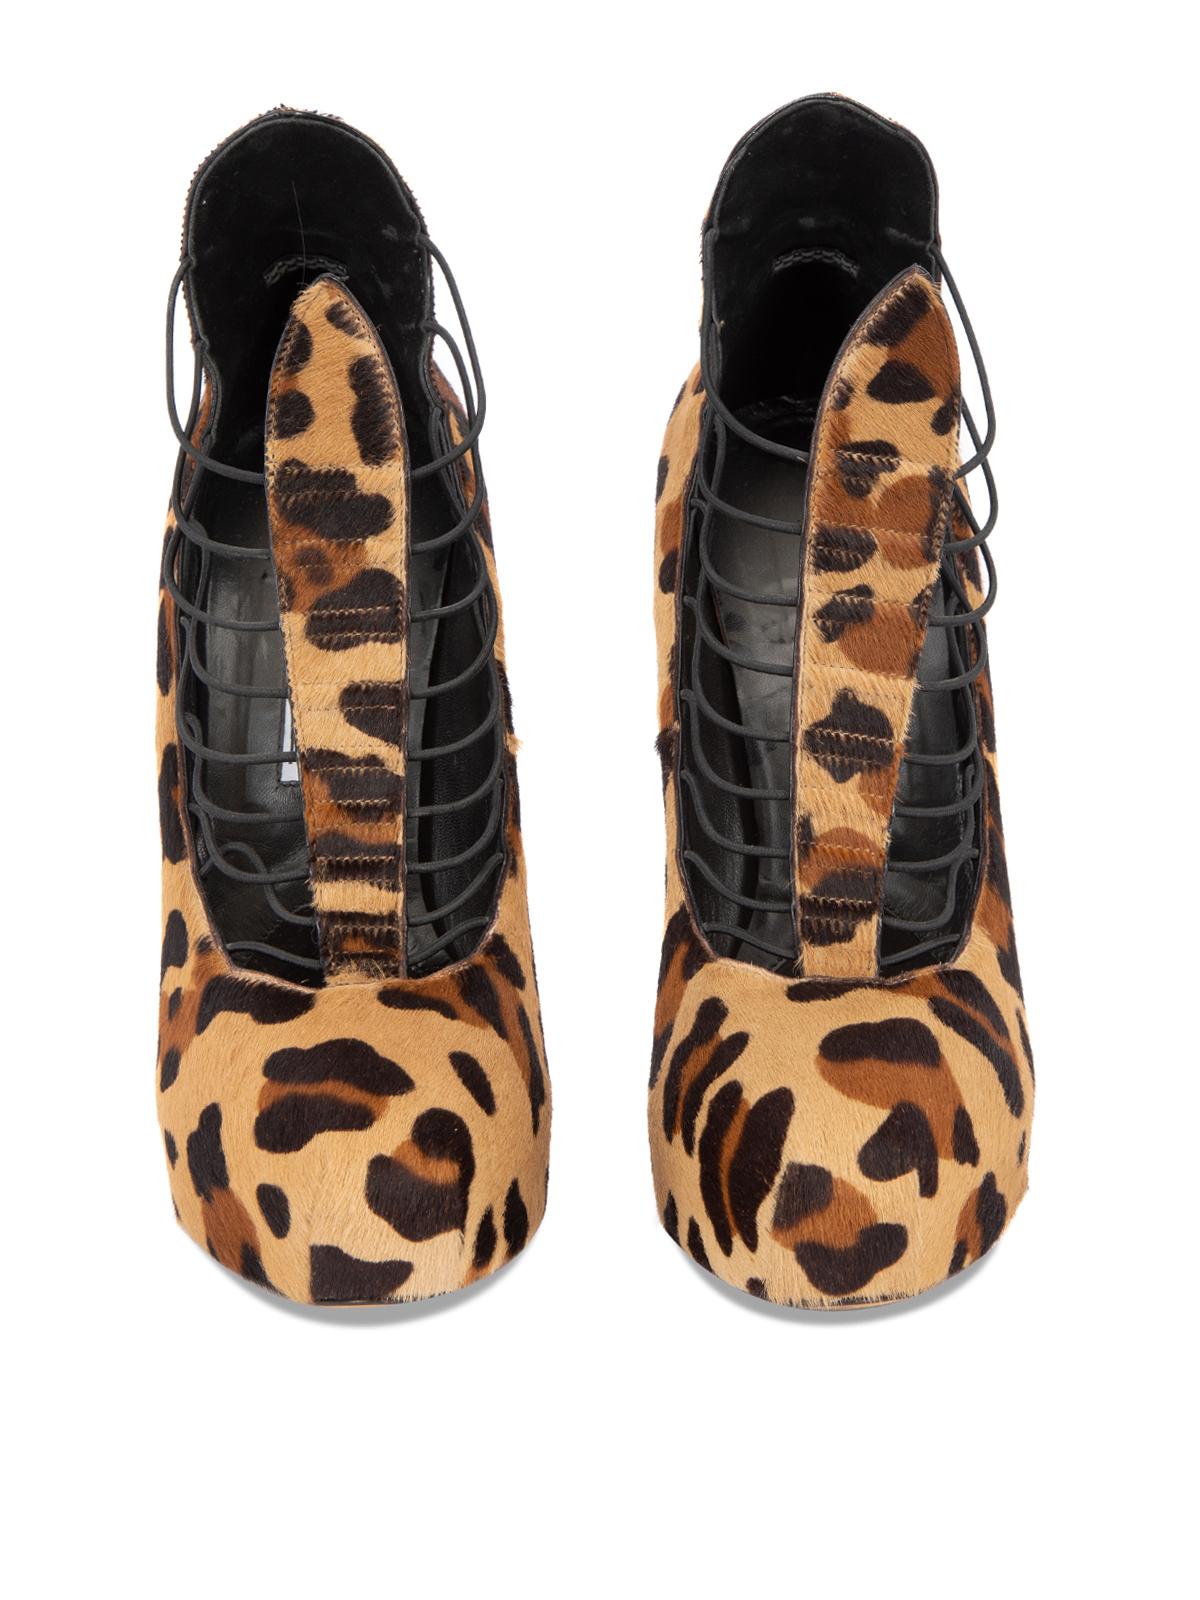 Pre-Loved Brian Atwood Women's Ponyhair Leopard Strappy Elastic Lola Platform In Excellent Condition For Sale In London, GB